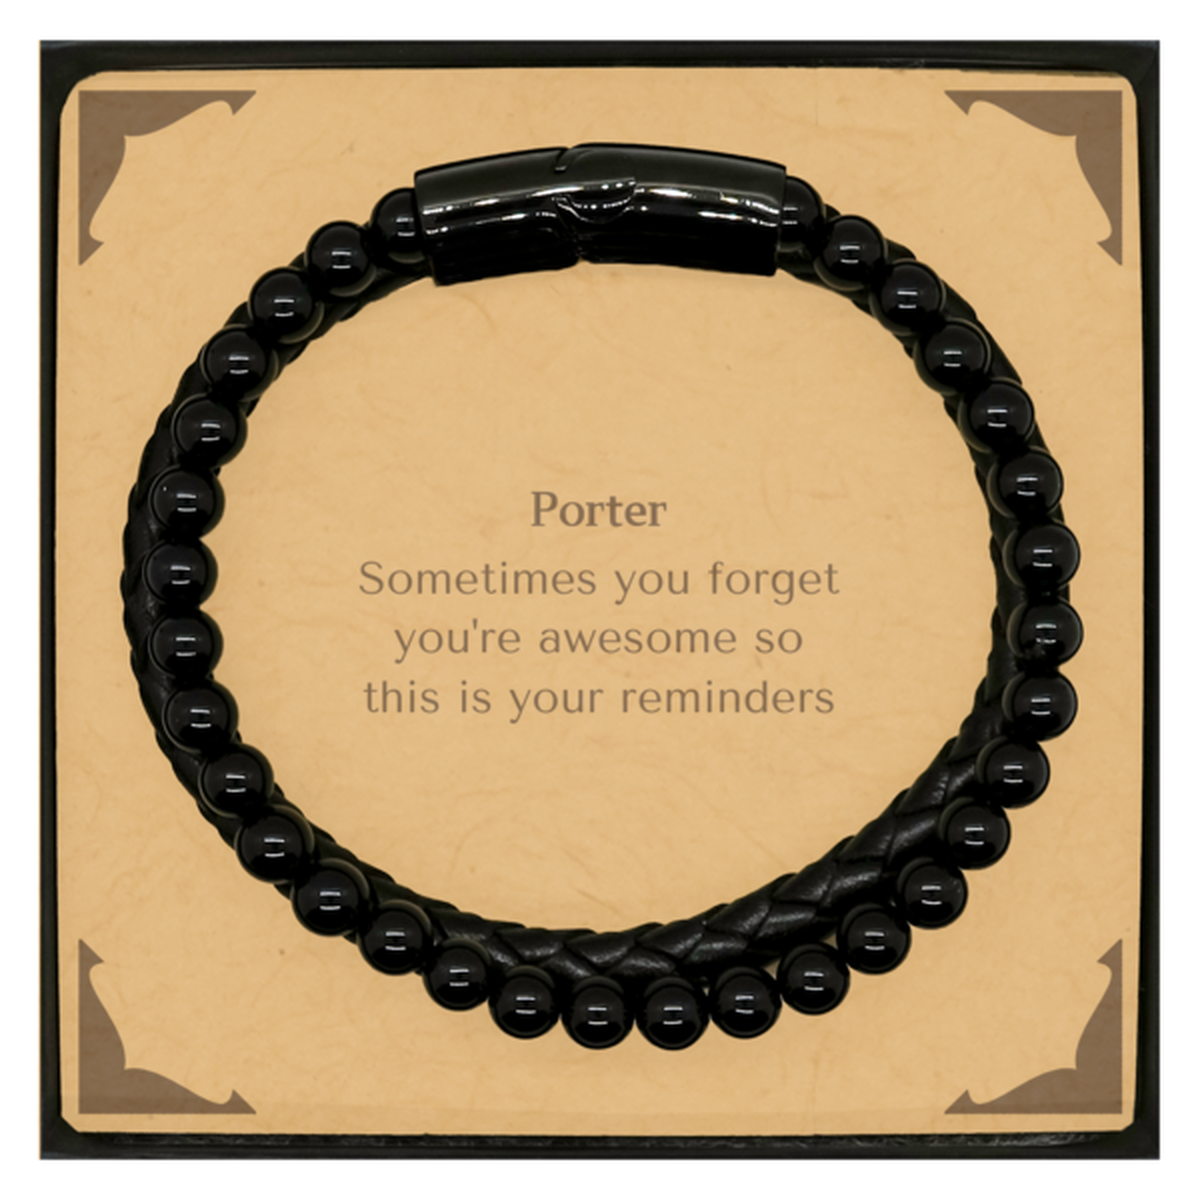 Sentimental Porter Stone Leather Bracelets, Porter Sometimes you forget you're awesome so this is your reminders, Graduation Christmas Birthday Gifts for Porter, Men, Women, Coworkers